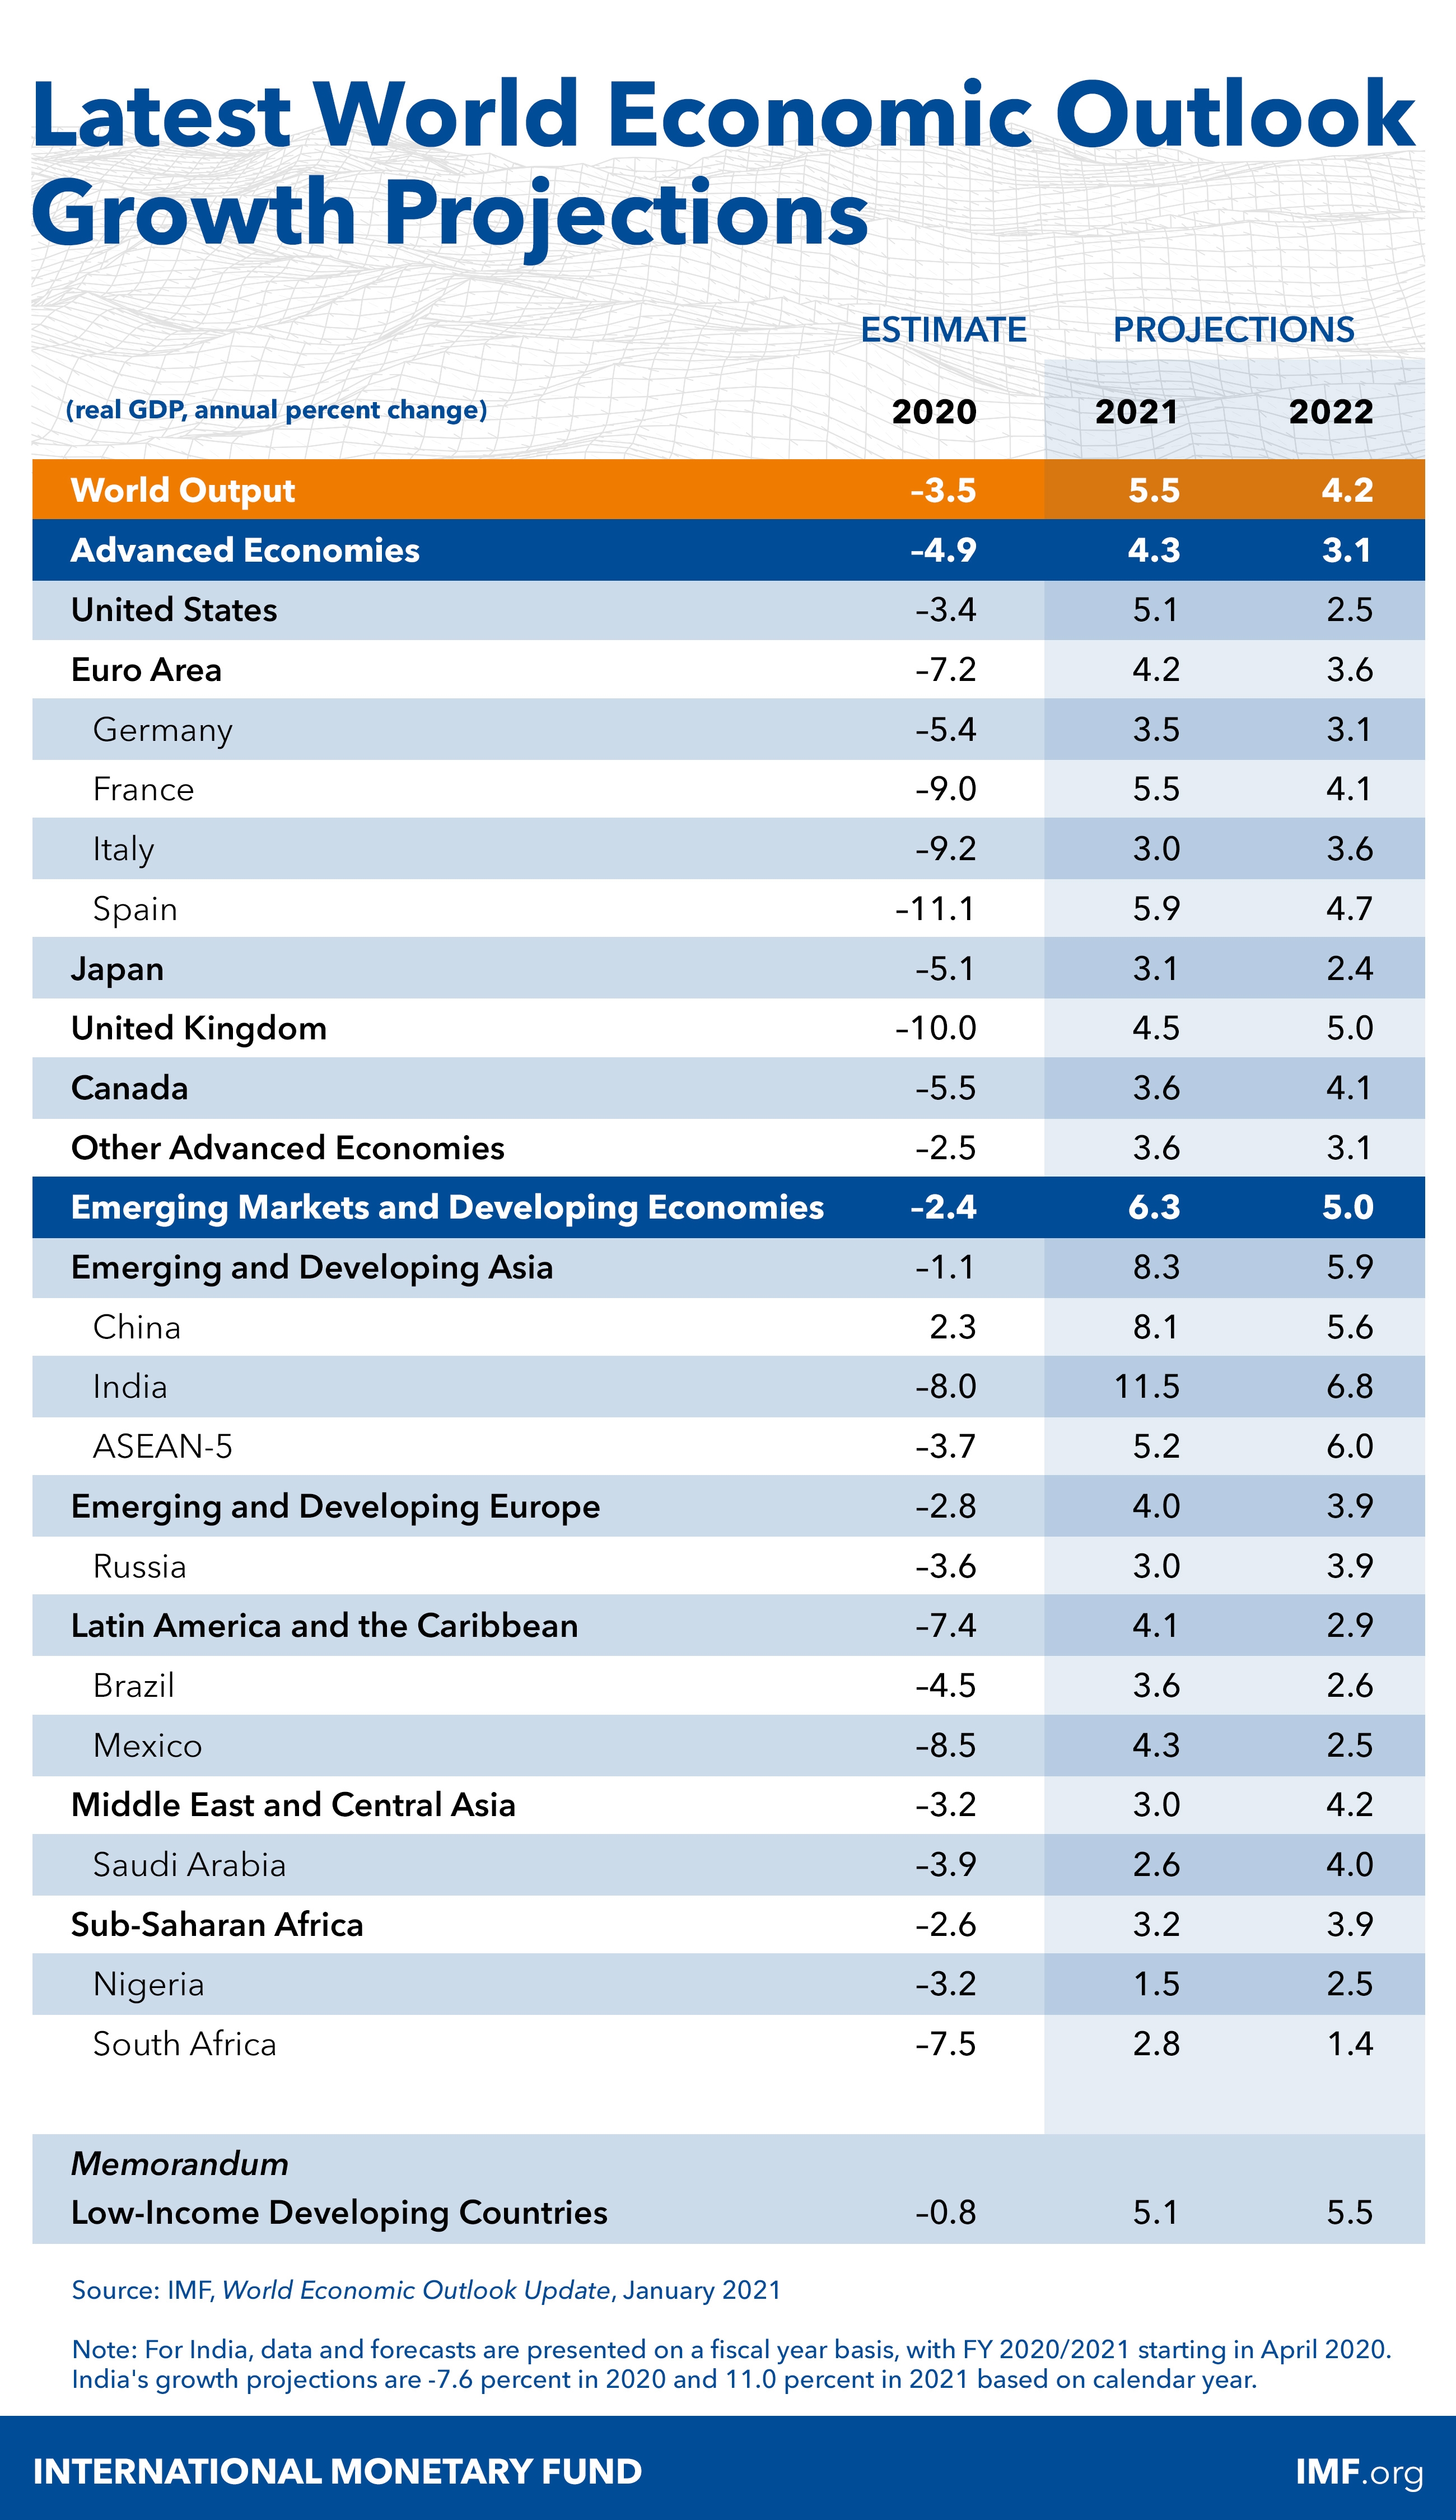 Table: Latest World Economic Outlook Growth Projections. Source: International Monetary Fund